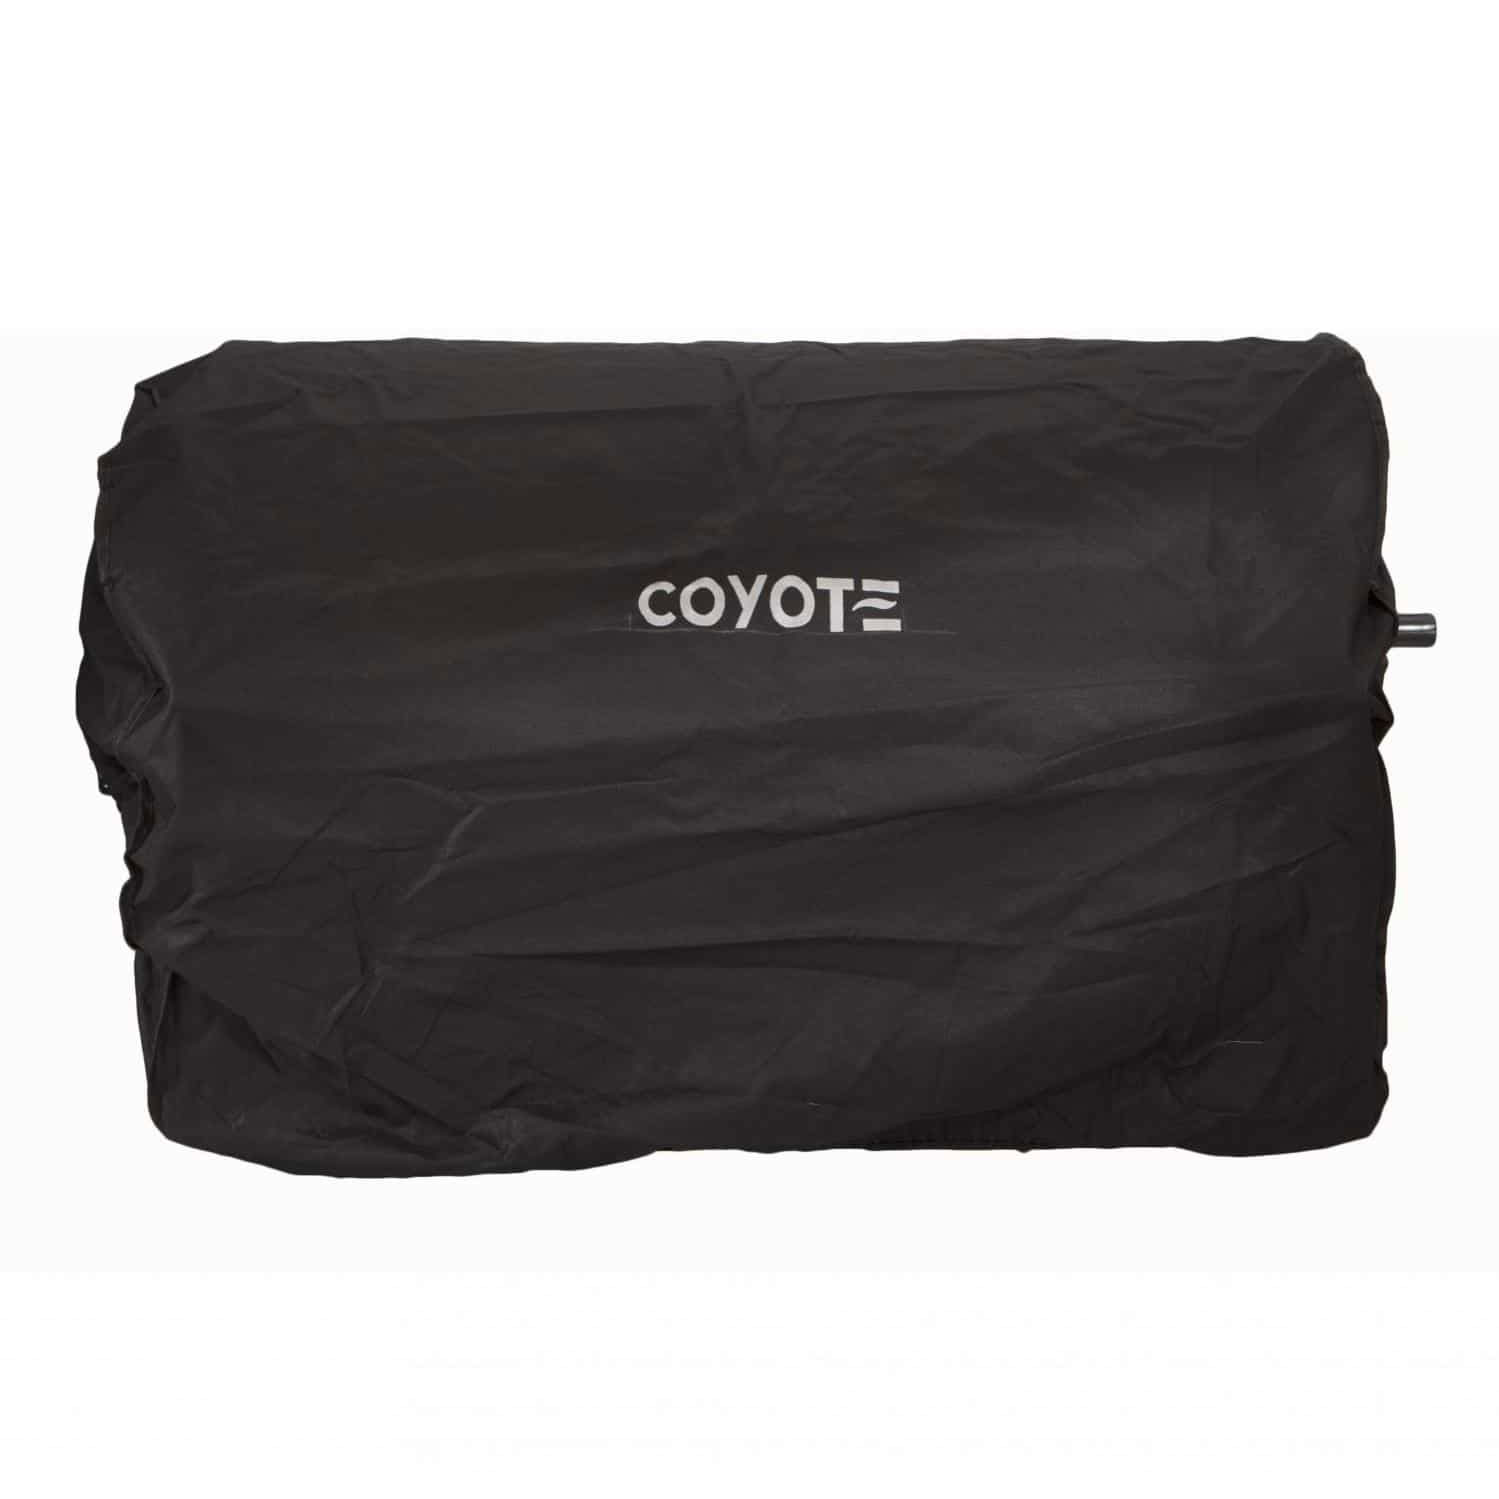 Coyote Outdoors 36 In Vinyl Protective Built In BBQ Barbecue Grill Cover, Black - image 1 of 2